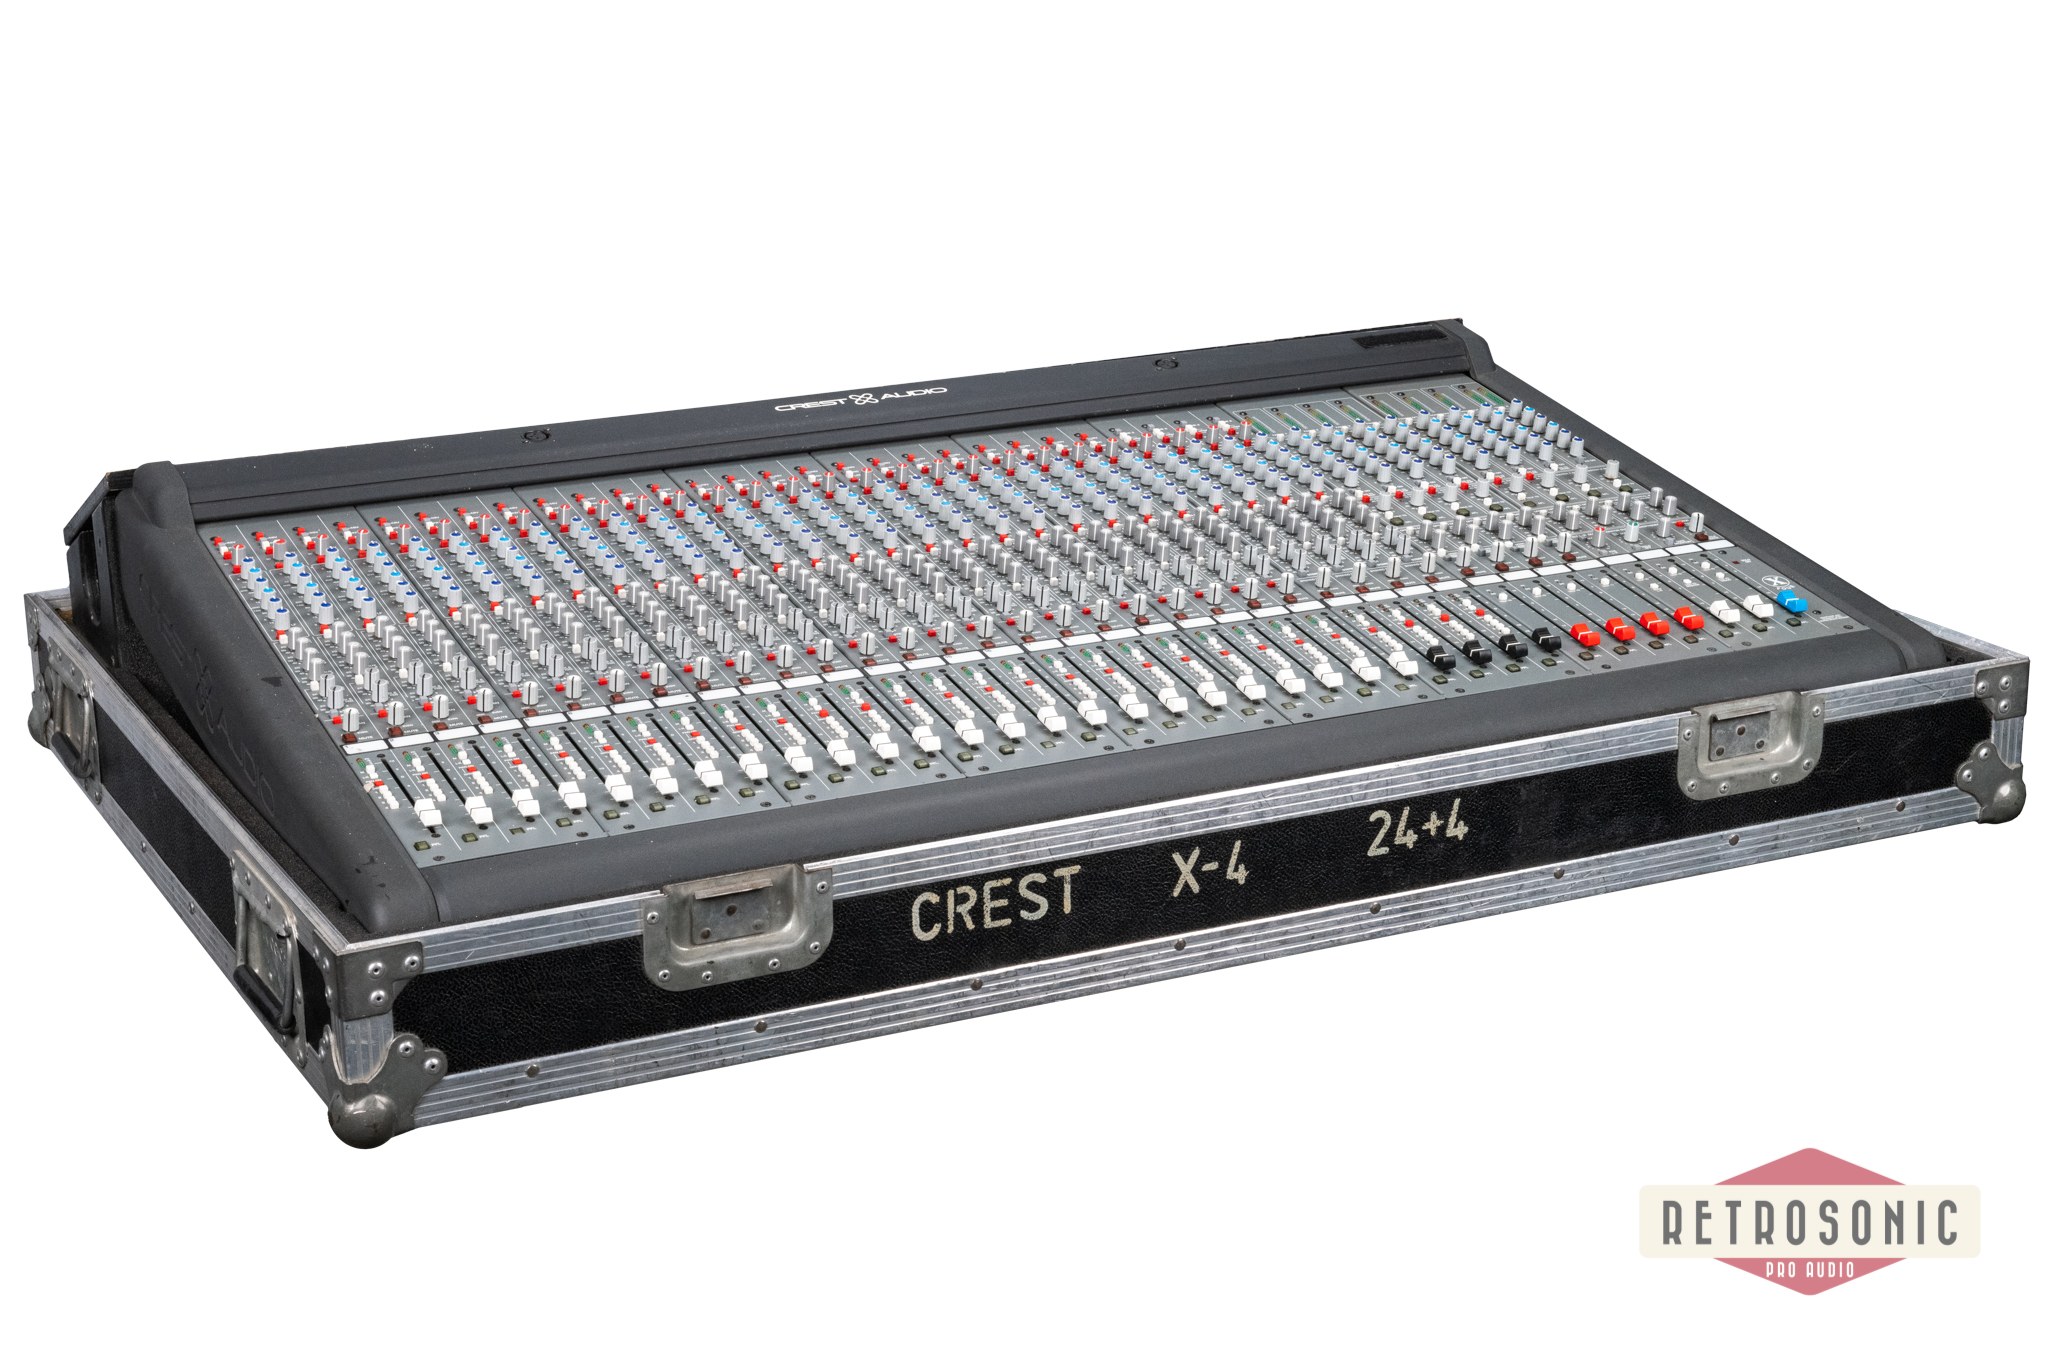 Crest X-4 24+4 St /4/2 Analog Mixing Console